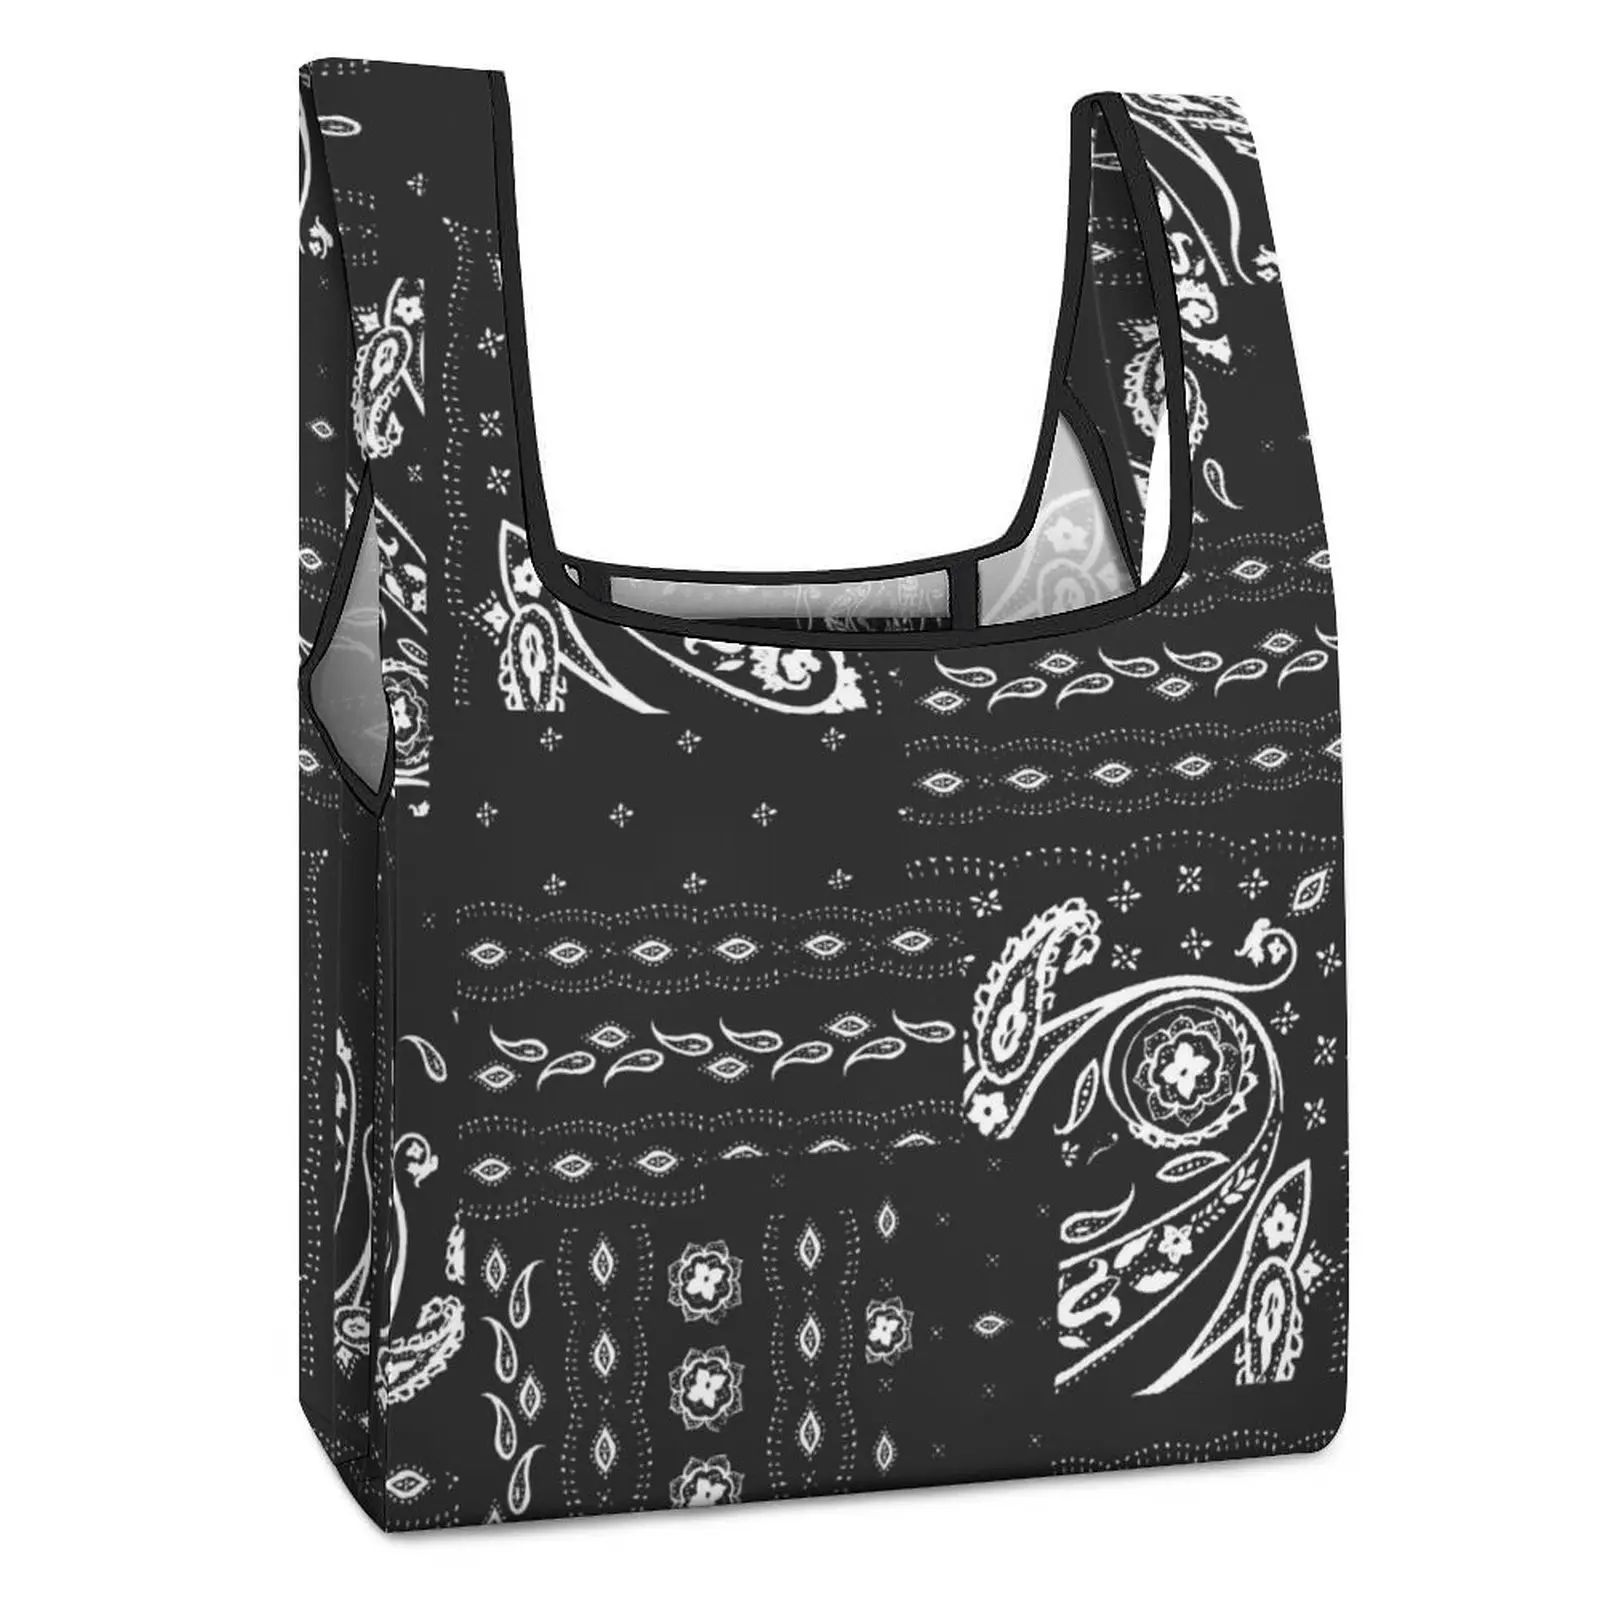 Customized Printed Shopping Bag Double Strap Handbag Black Unique Decor Tote Casual Woman Grocery Bag Custom Pattern bag back seat hook car water bottles black groceries grocery bags hanger purses schoolbags shopping bags 4pcs set